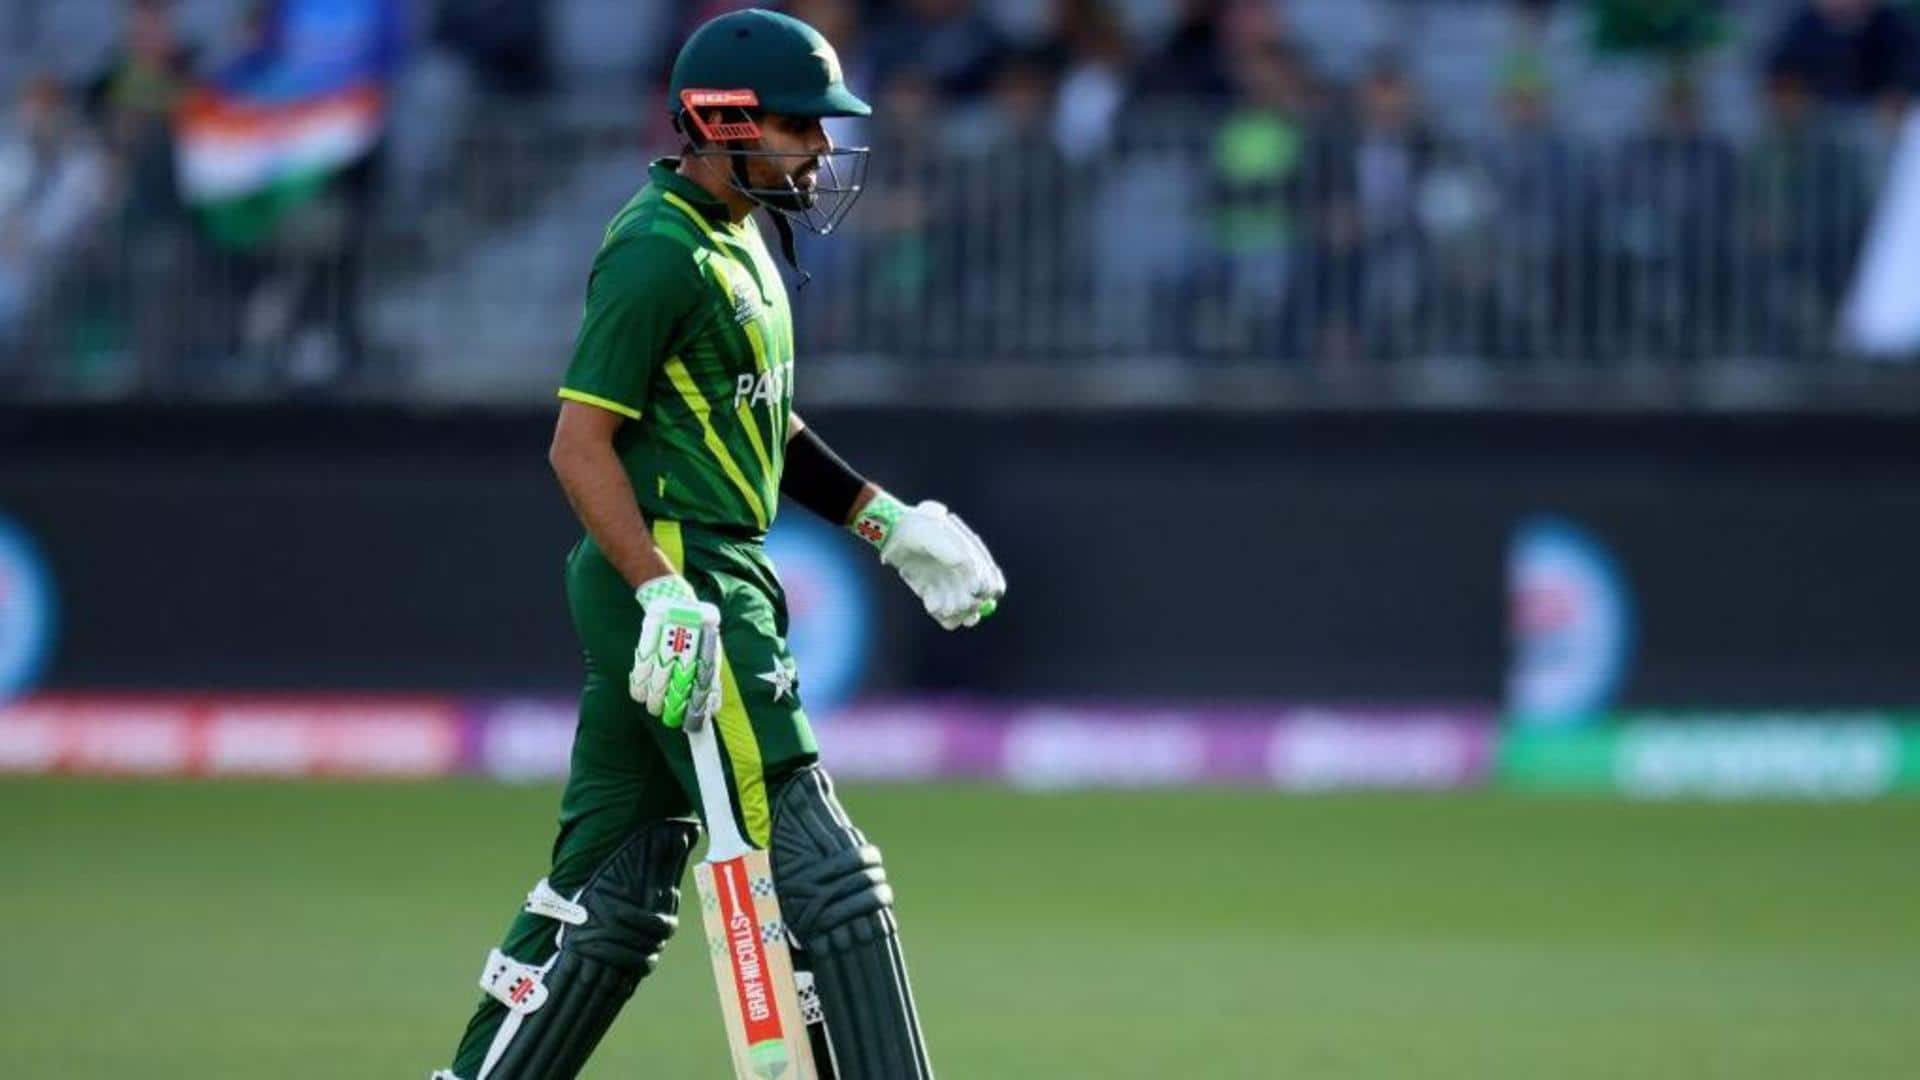 Is Babar Azam going through his worst phase? Key stats